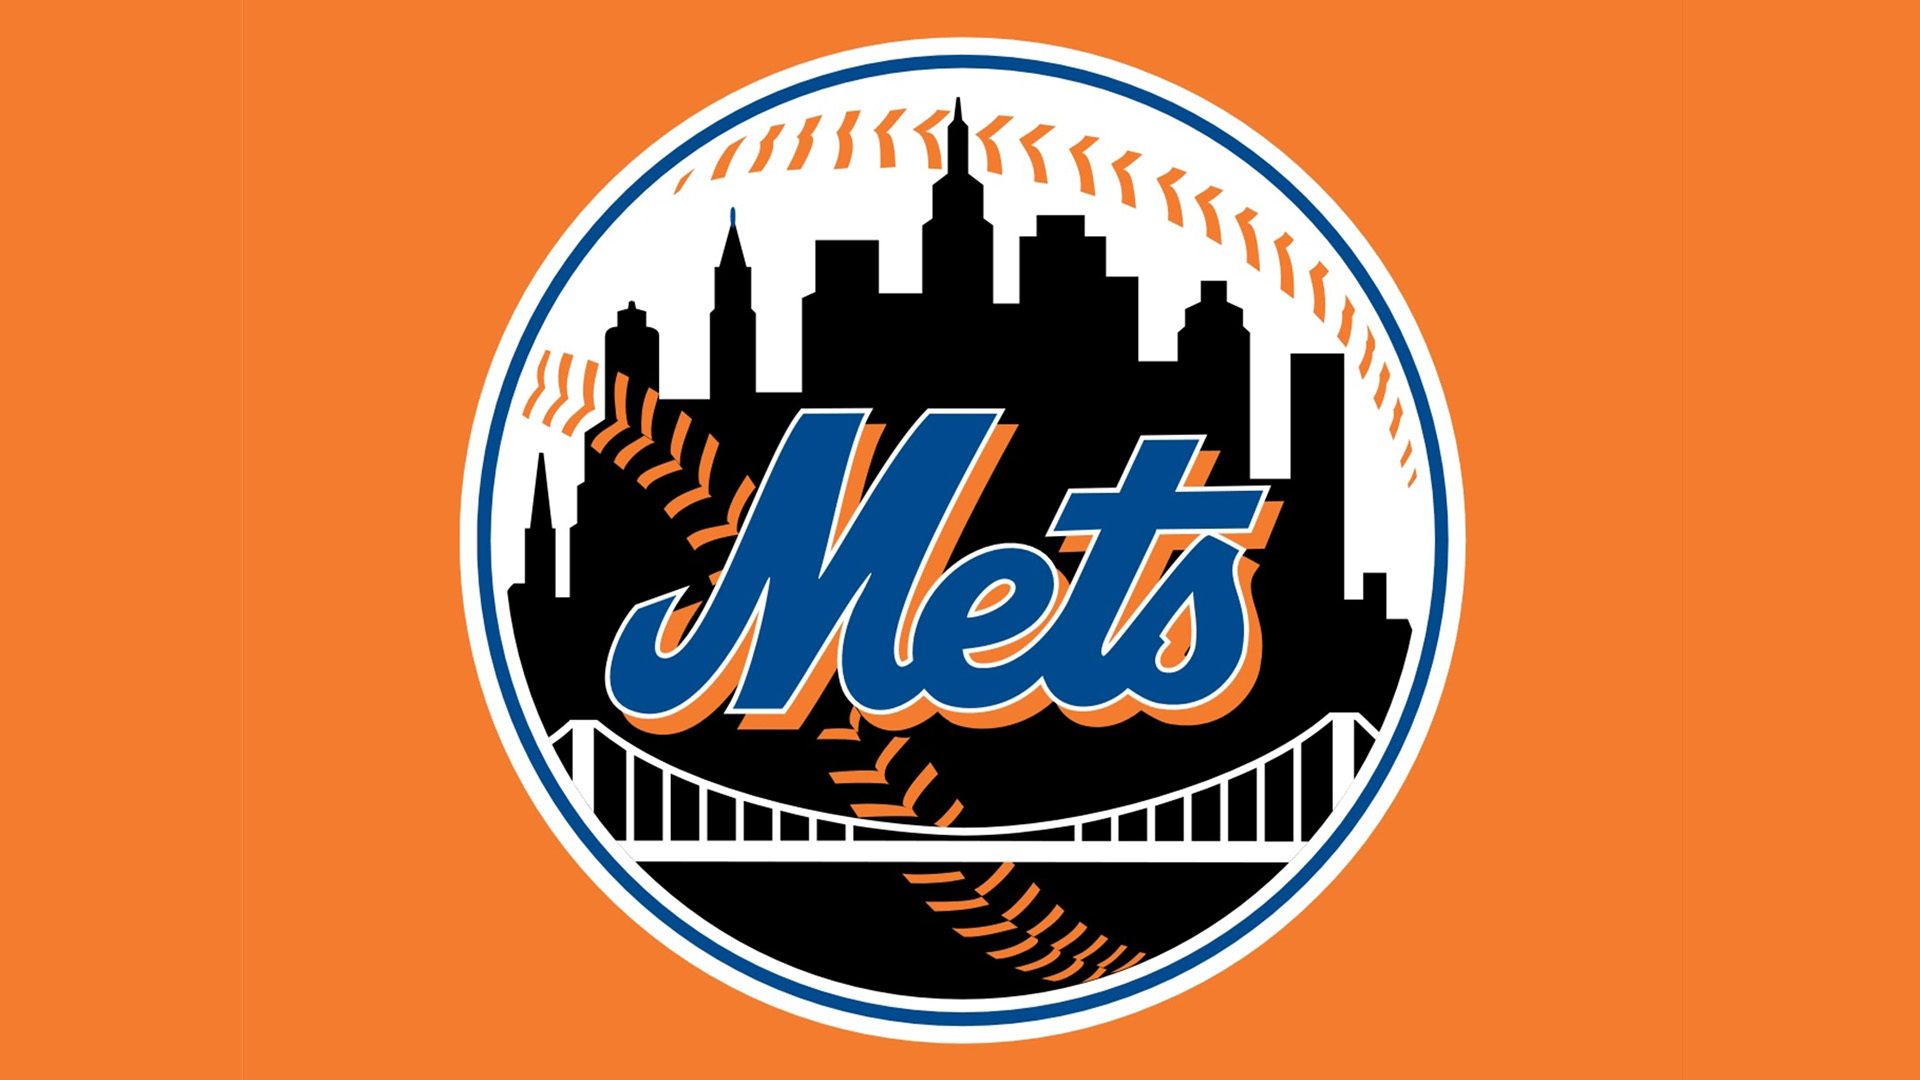 New York Mets Wallpapers Images Photos Pictures Backgrounds HD Wallpapers Download Free Images Wallpaper [wallpaper981.blogspot.com]